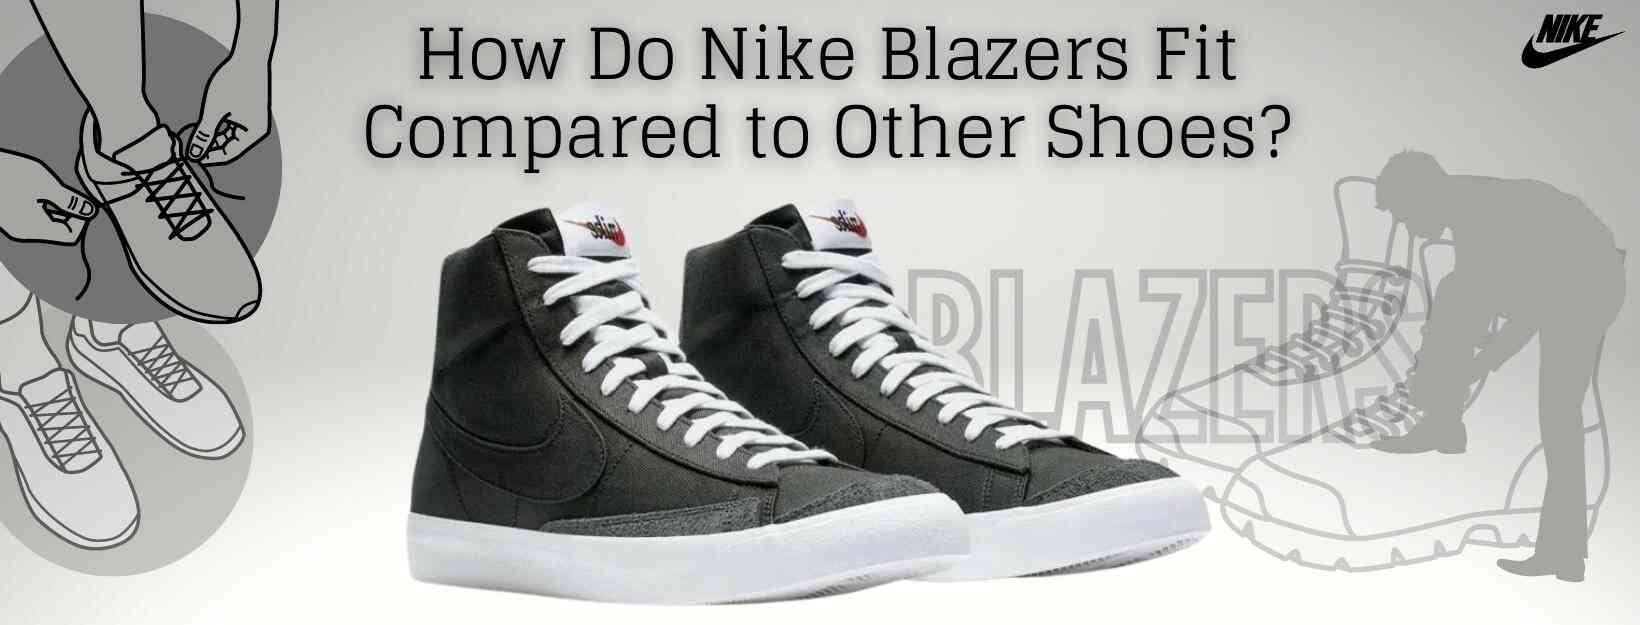 How Do Nike Blazers Fit Compared to Other Shoes?